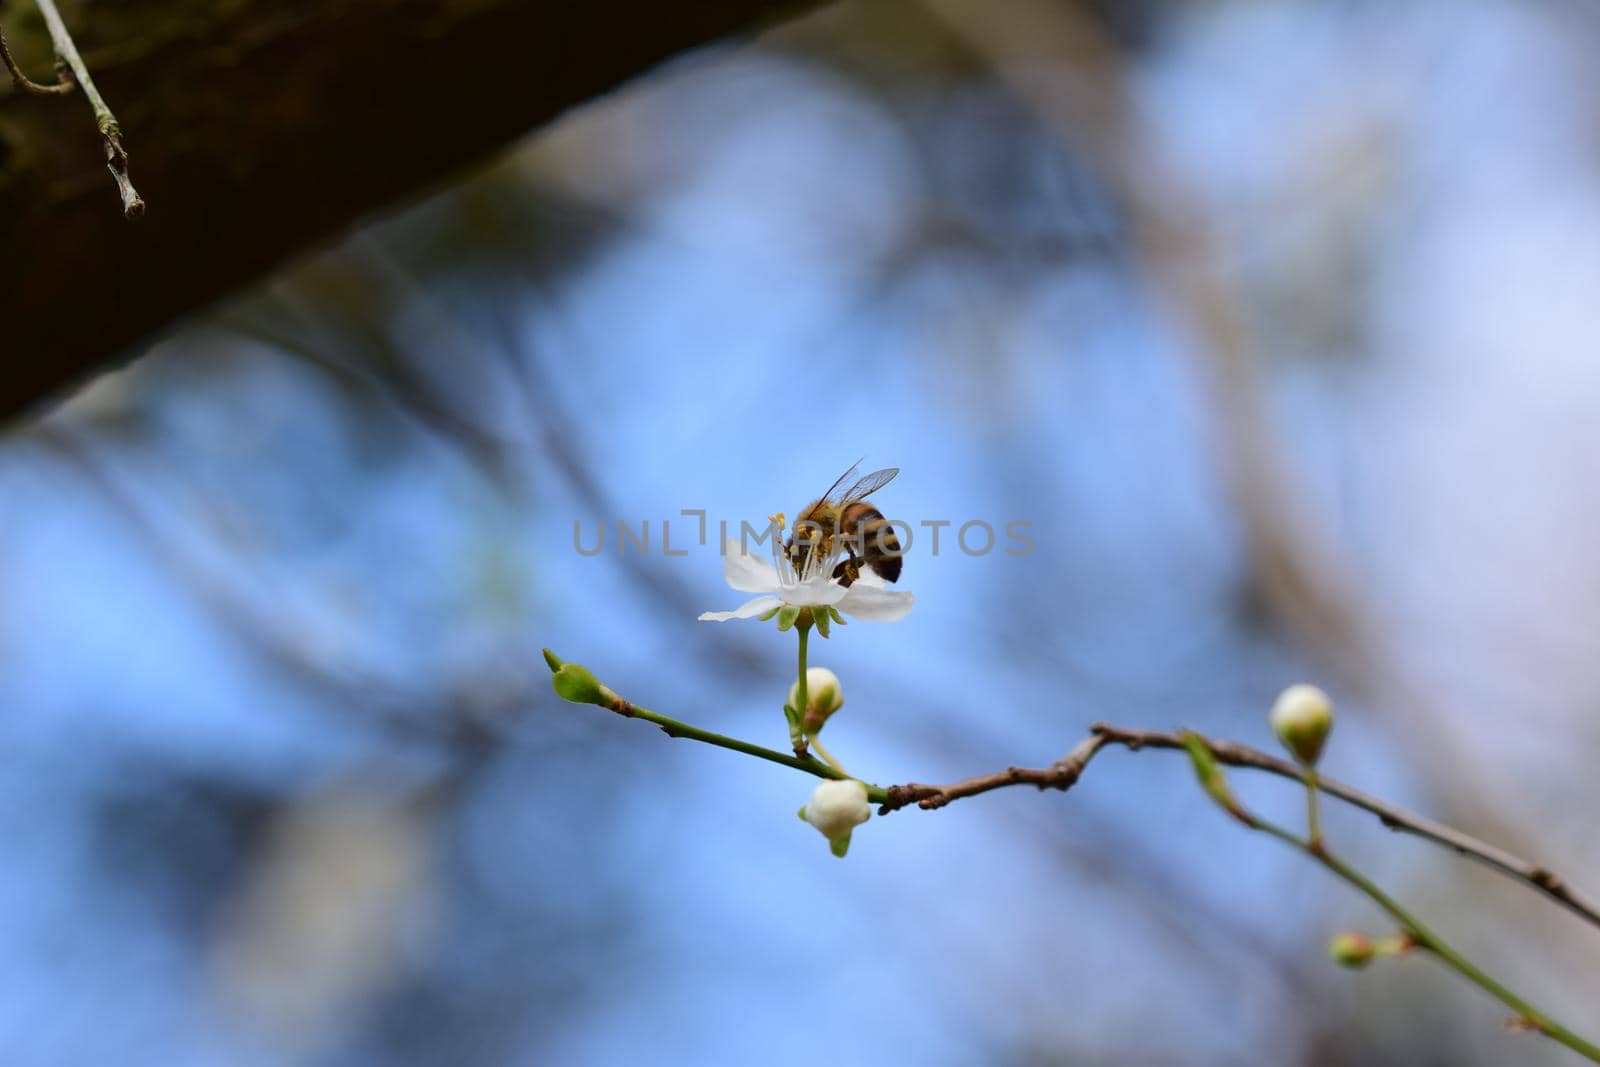 Close up of a bee on a white blossom against a blurred background by Luise123